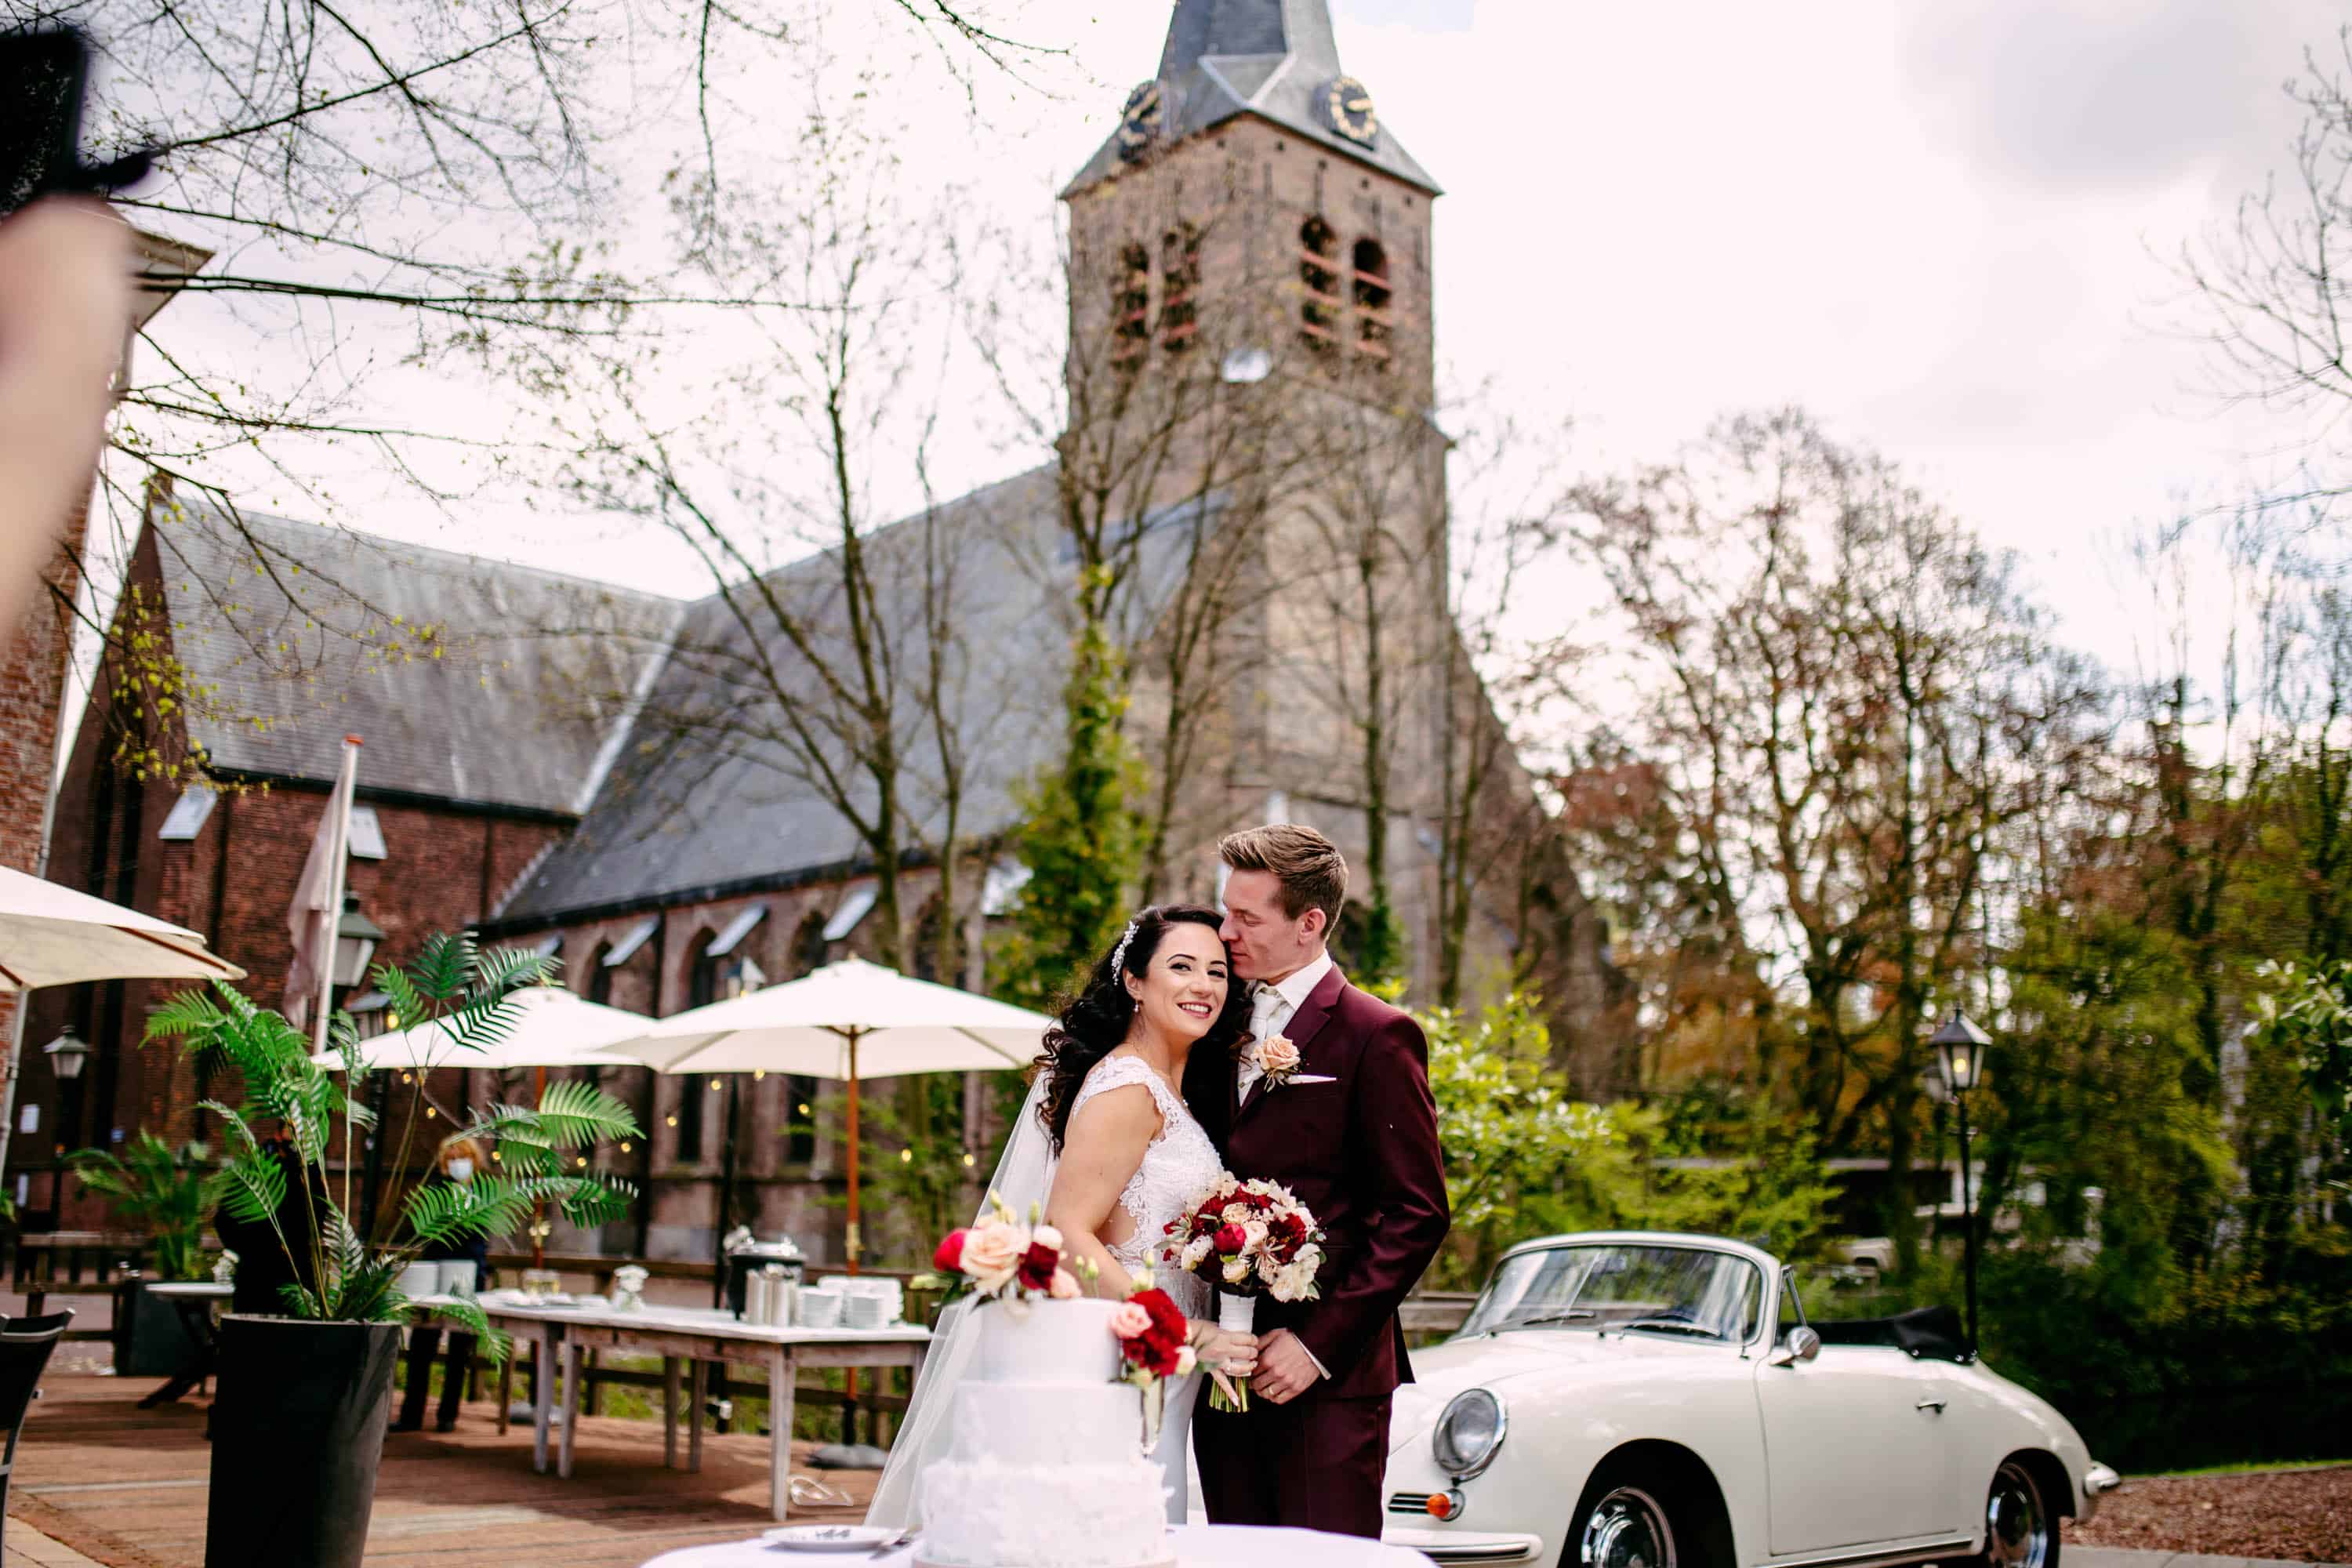 A bride and groom kiss in front of a church.